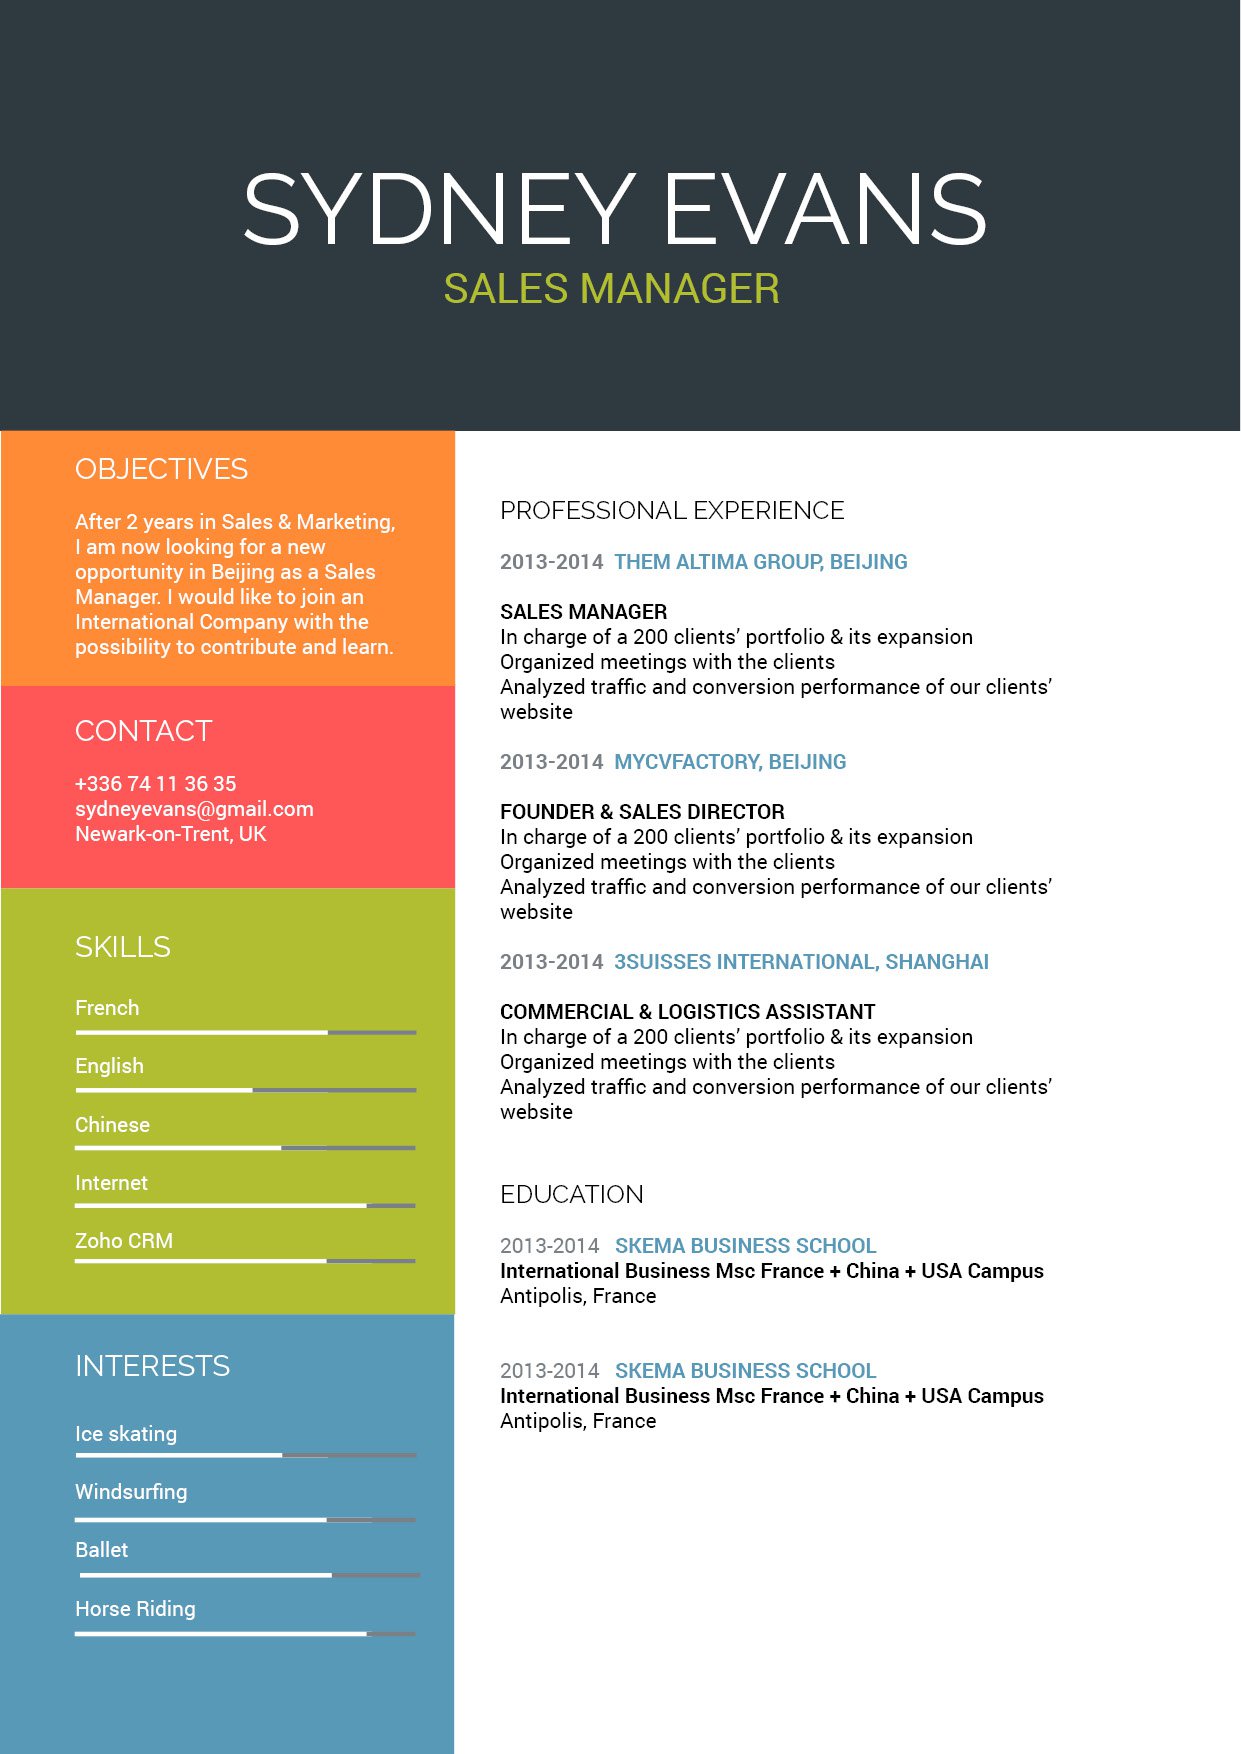 A great resume template to land you that dream job thanks to its designs and formatting.